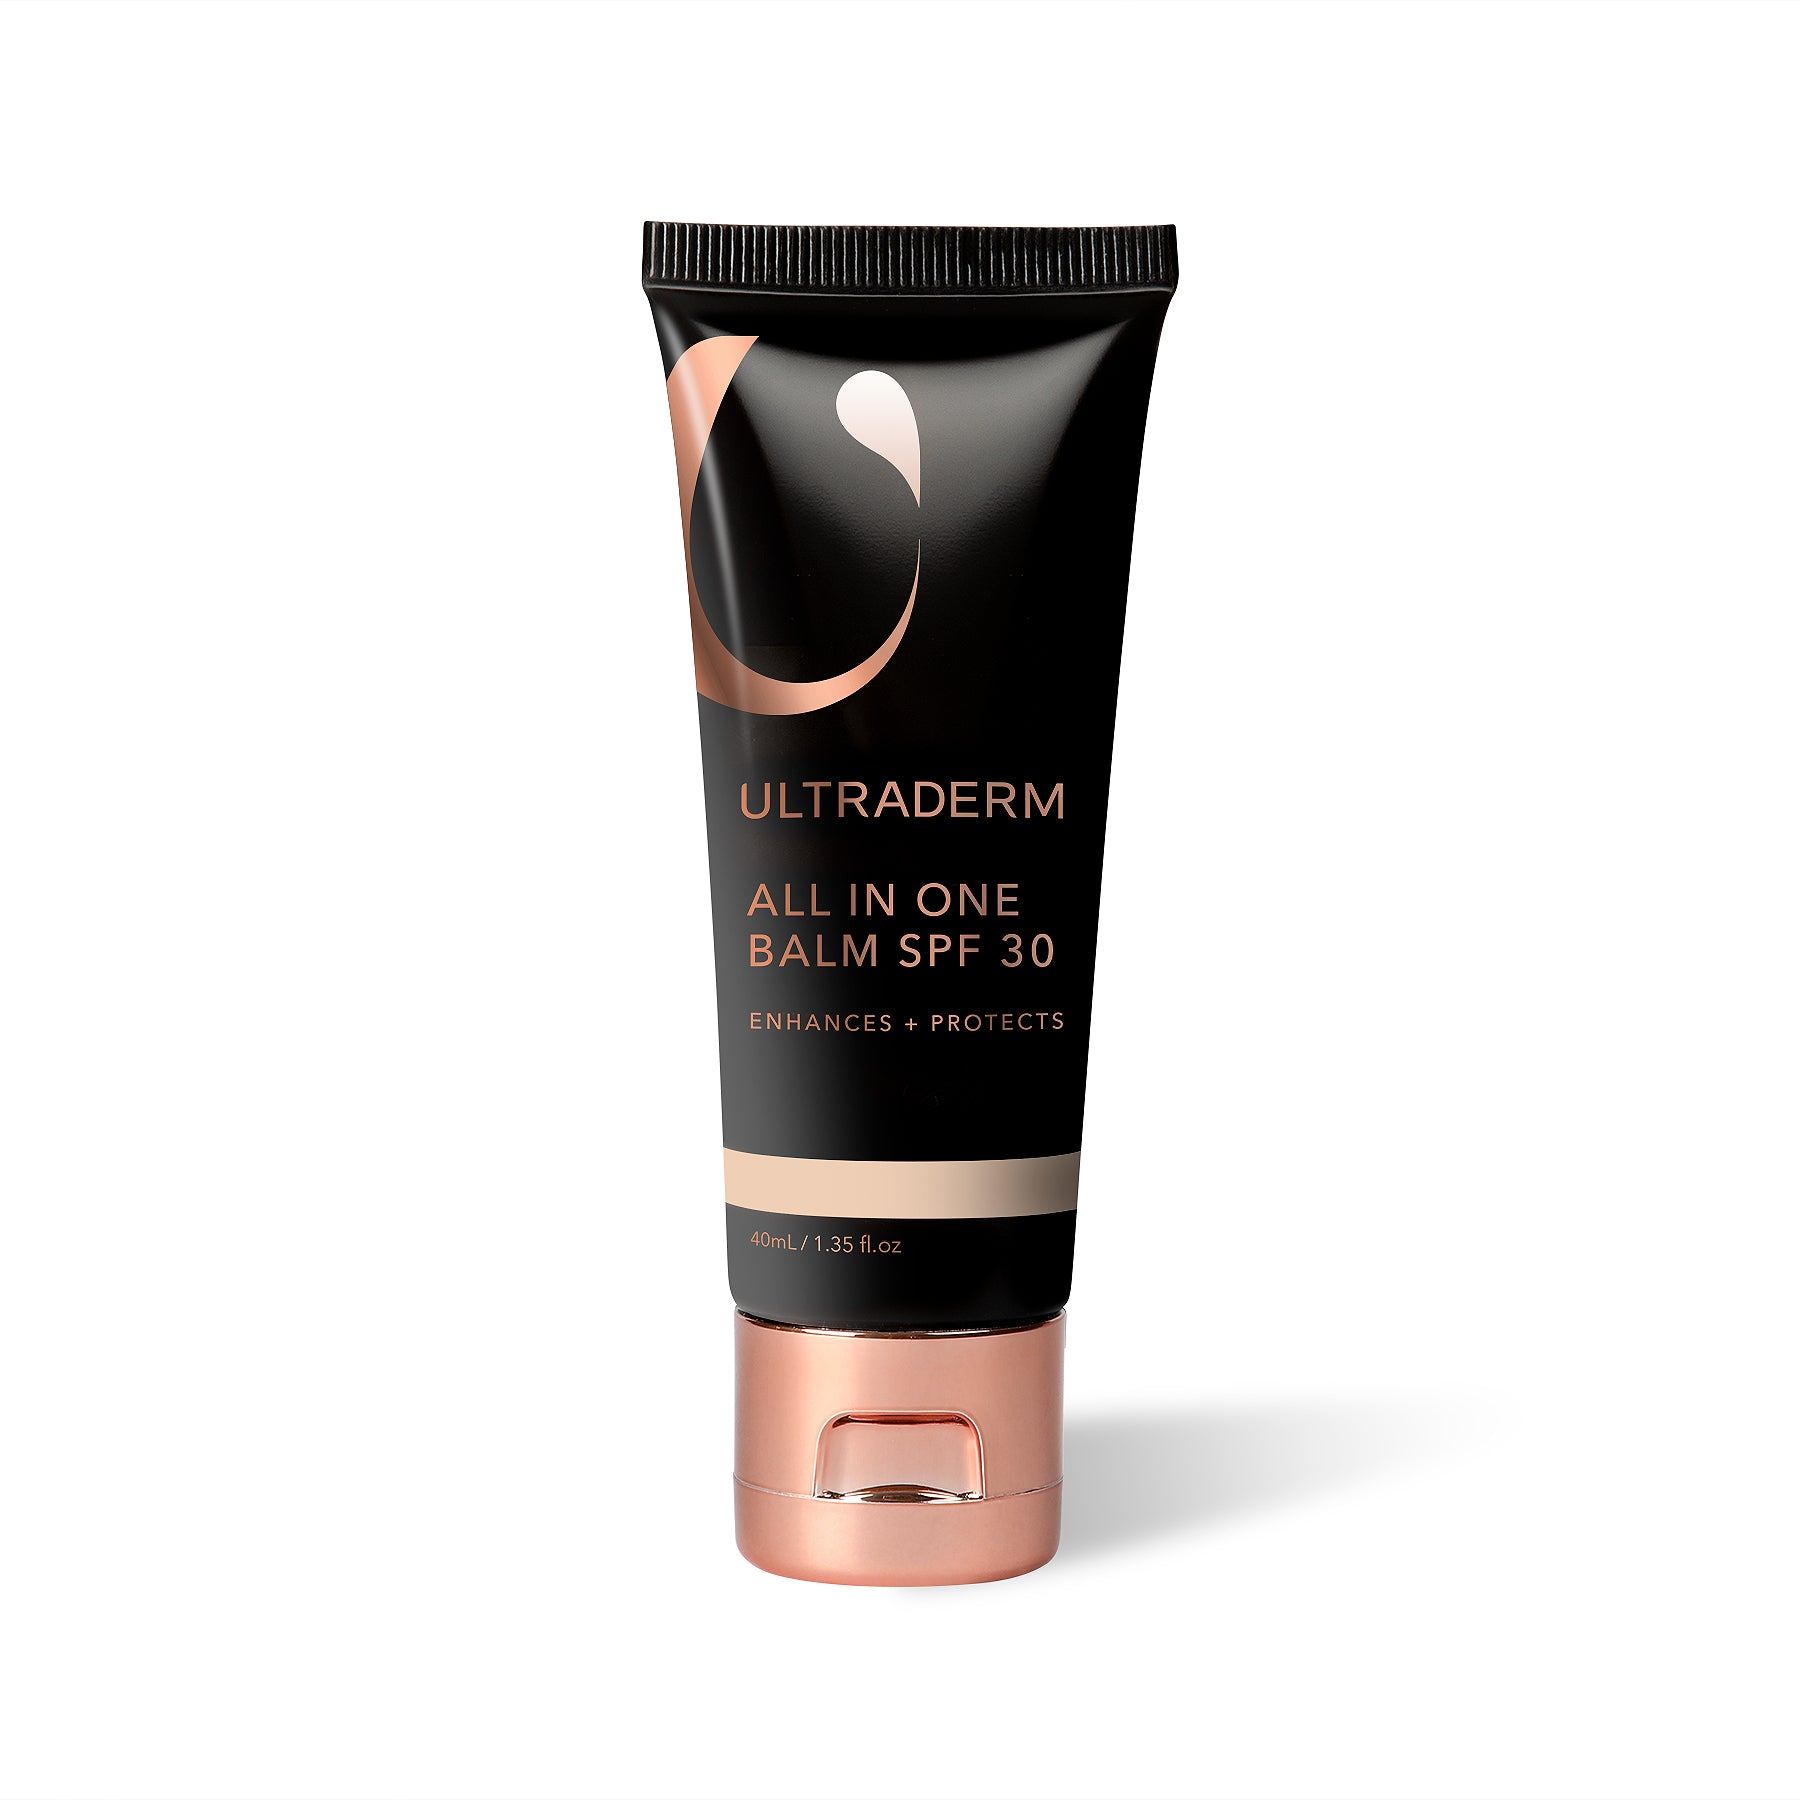 All In One Balm SPF 30 Nude